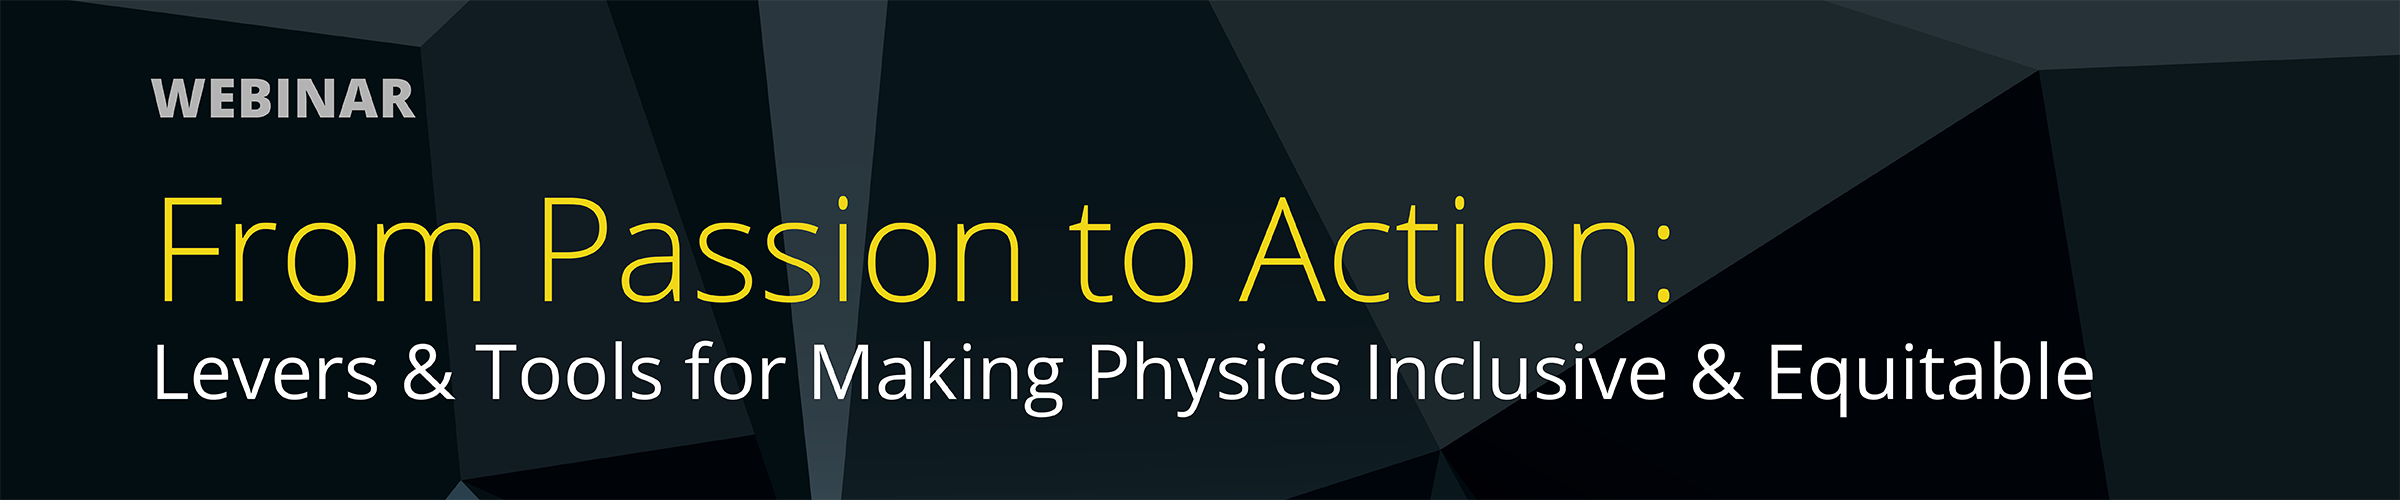 From Passion to Action: Levers and Tools for Making Physics Inclusive and Equitable